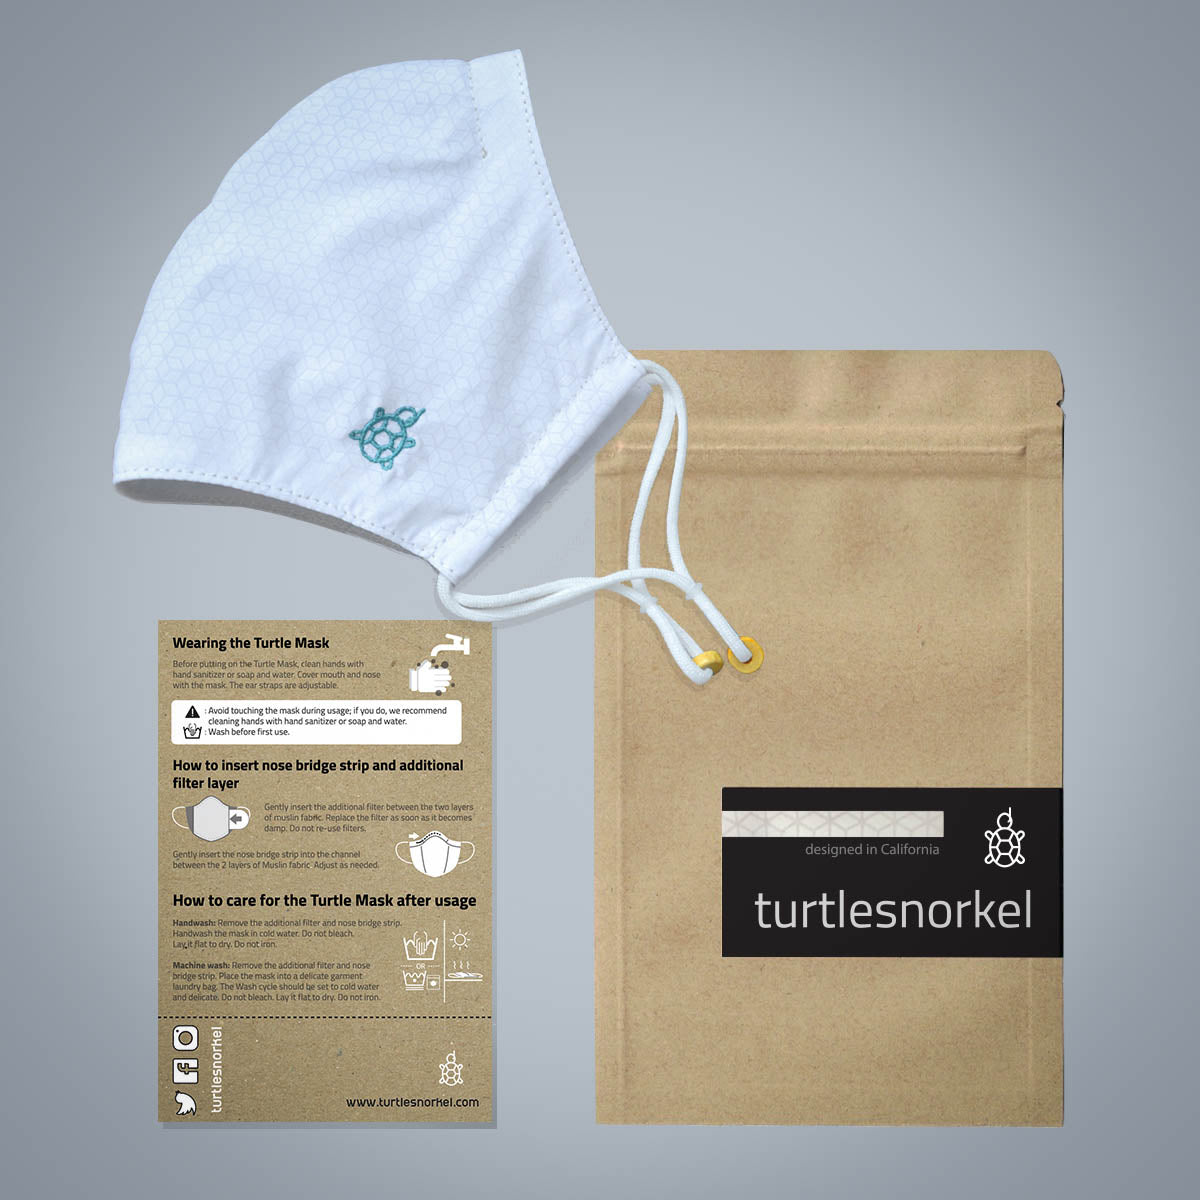 Turtle Mask 2.1 Sea Coral White  - Limited Edition  The inner layer is constructed with the same lightweight muslin cotton that helps reduce skin irritations and provide breathability. The special inner sleeve pocket houses insertable filters that help reduce symptoms from dust, air pollution, allergies and other airborne contaminants.   The mask's outer layer comes in various styles and patterns, making it fun and fashionable.